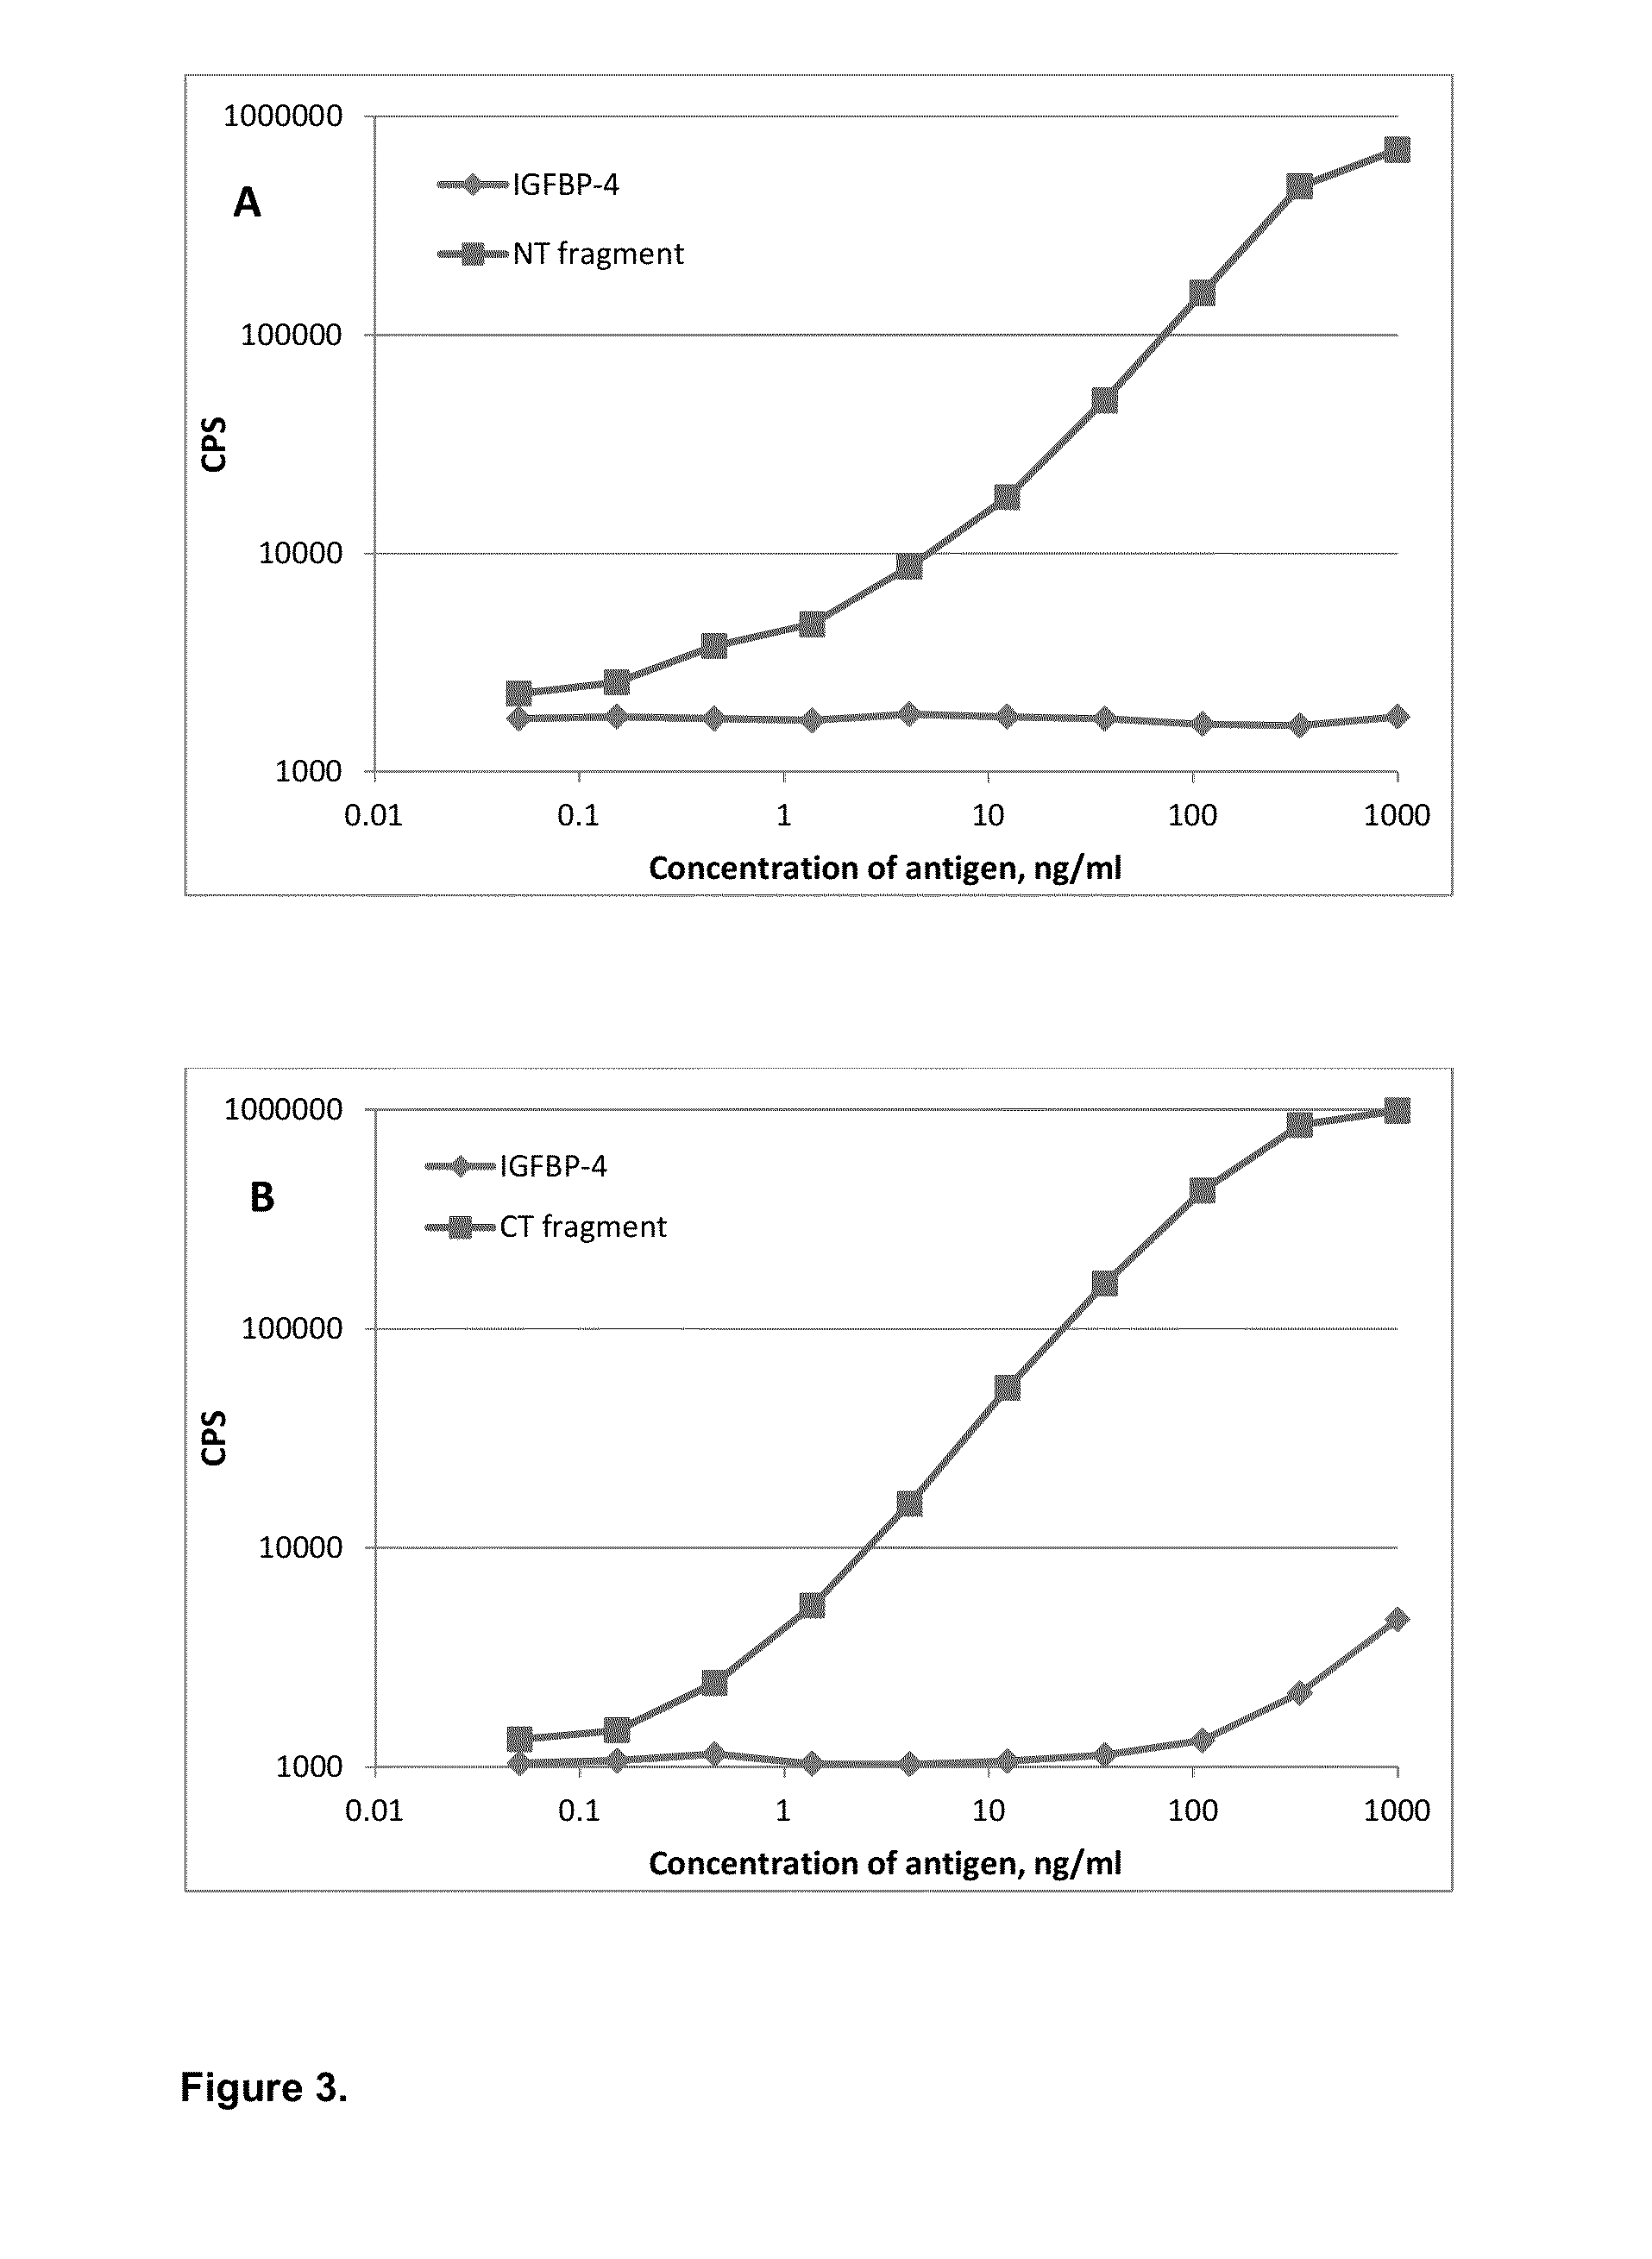 Method for determining the risk of cardiovascular events using igfbp fragments